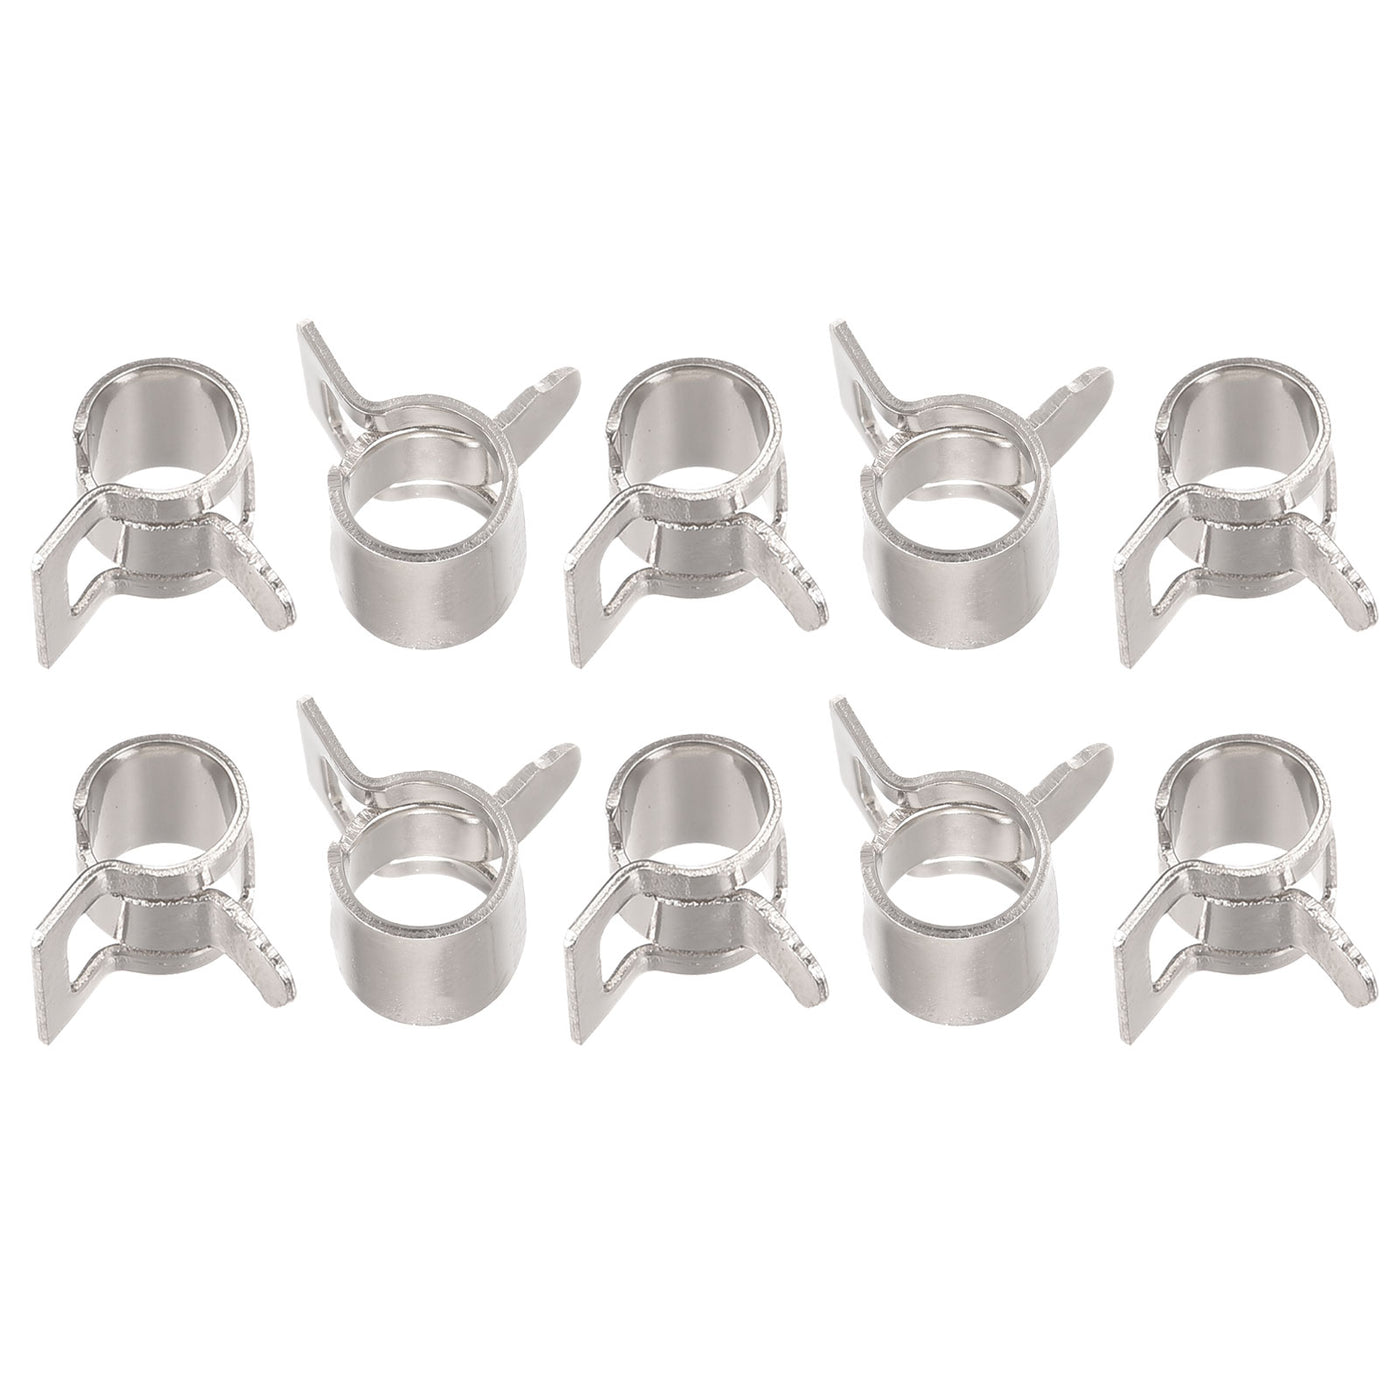 Uxcell Uxcell Spring Hose Clamp, 20pcs 65Mn Steel 12mm Low Pressure Air Clip, Nickel Plated